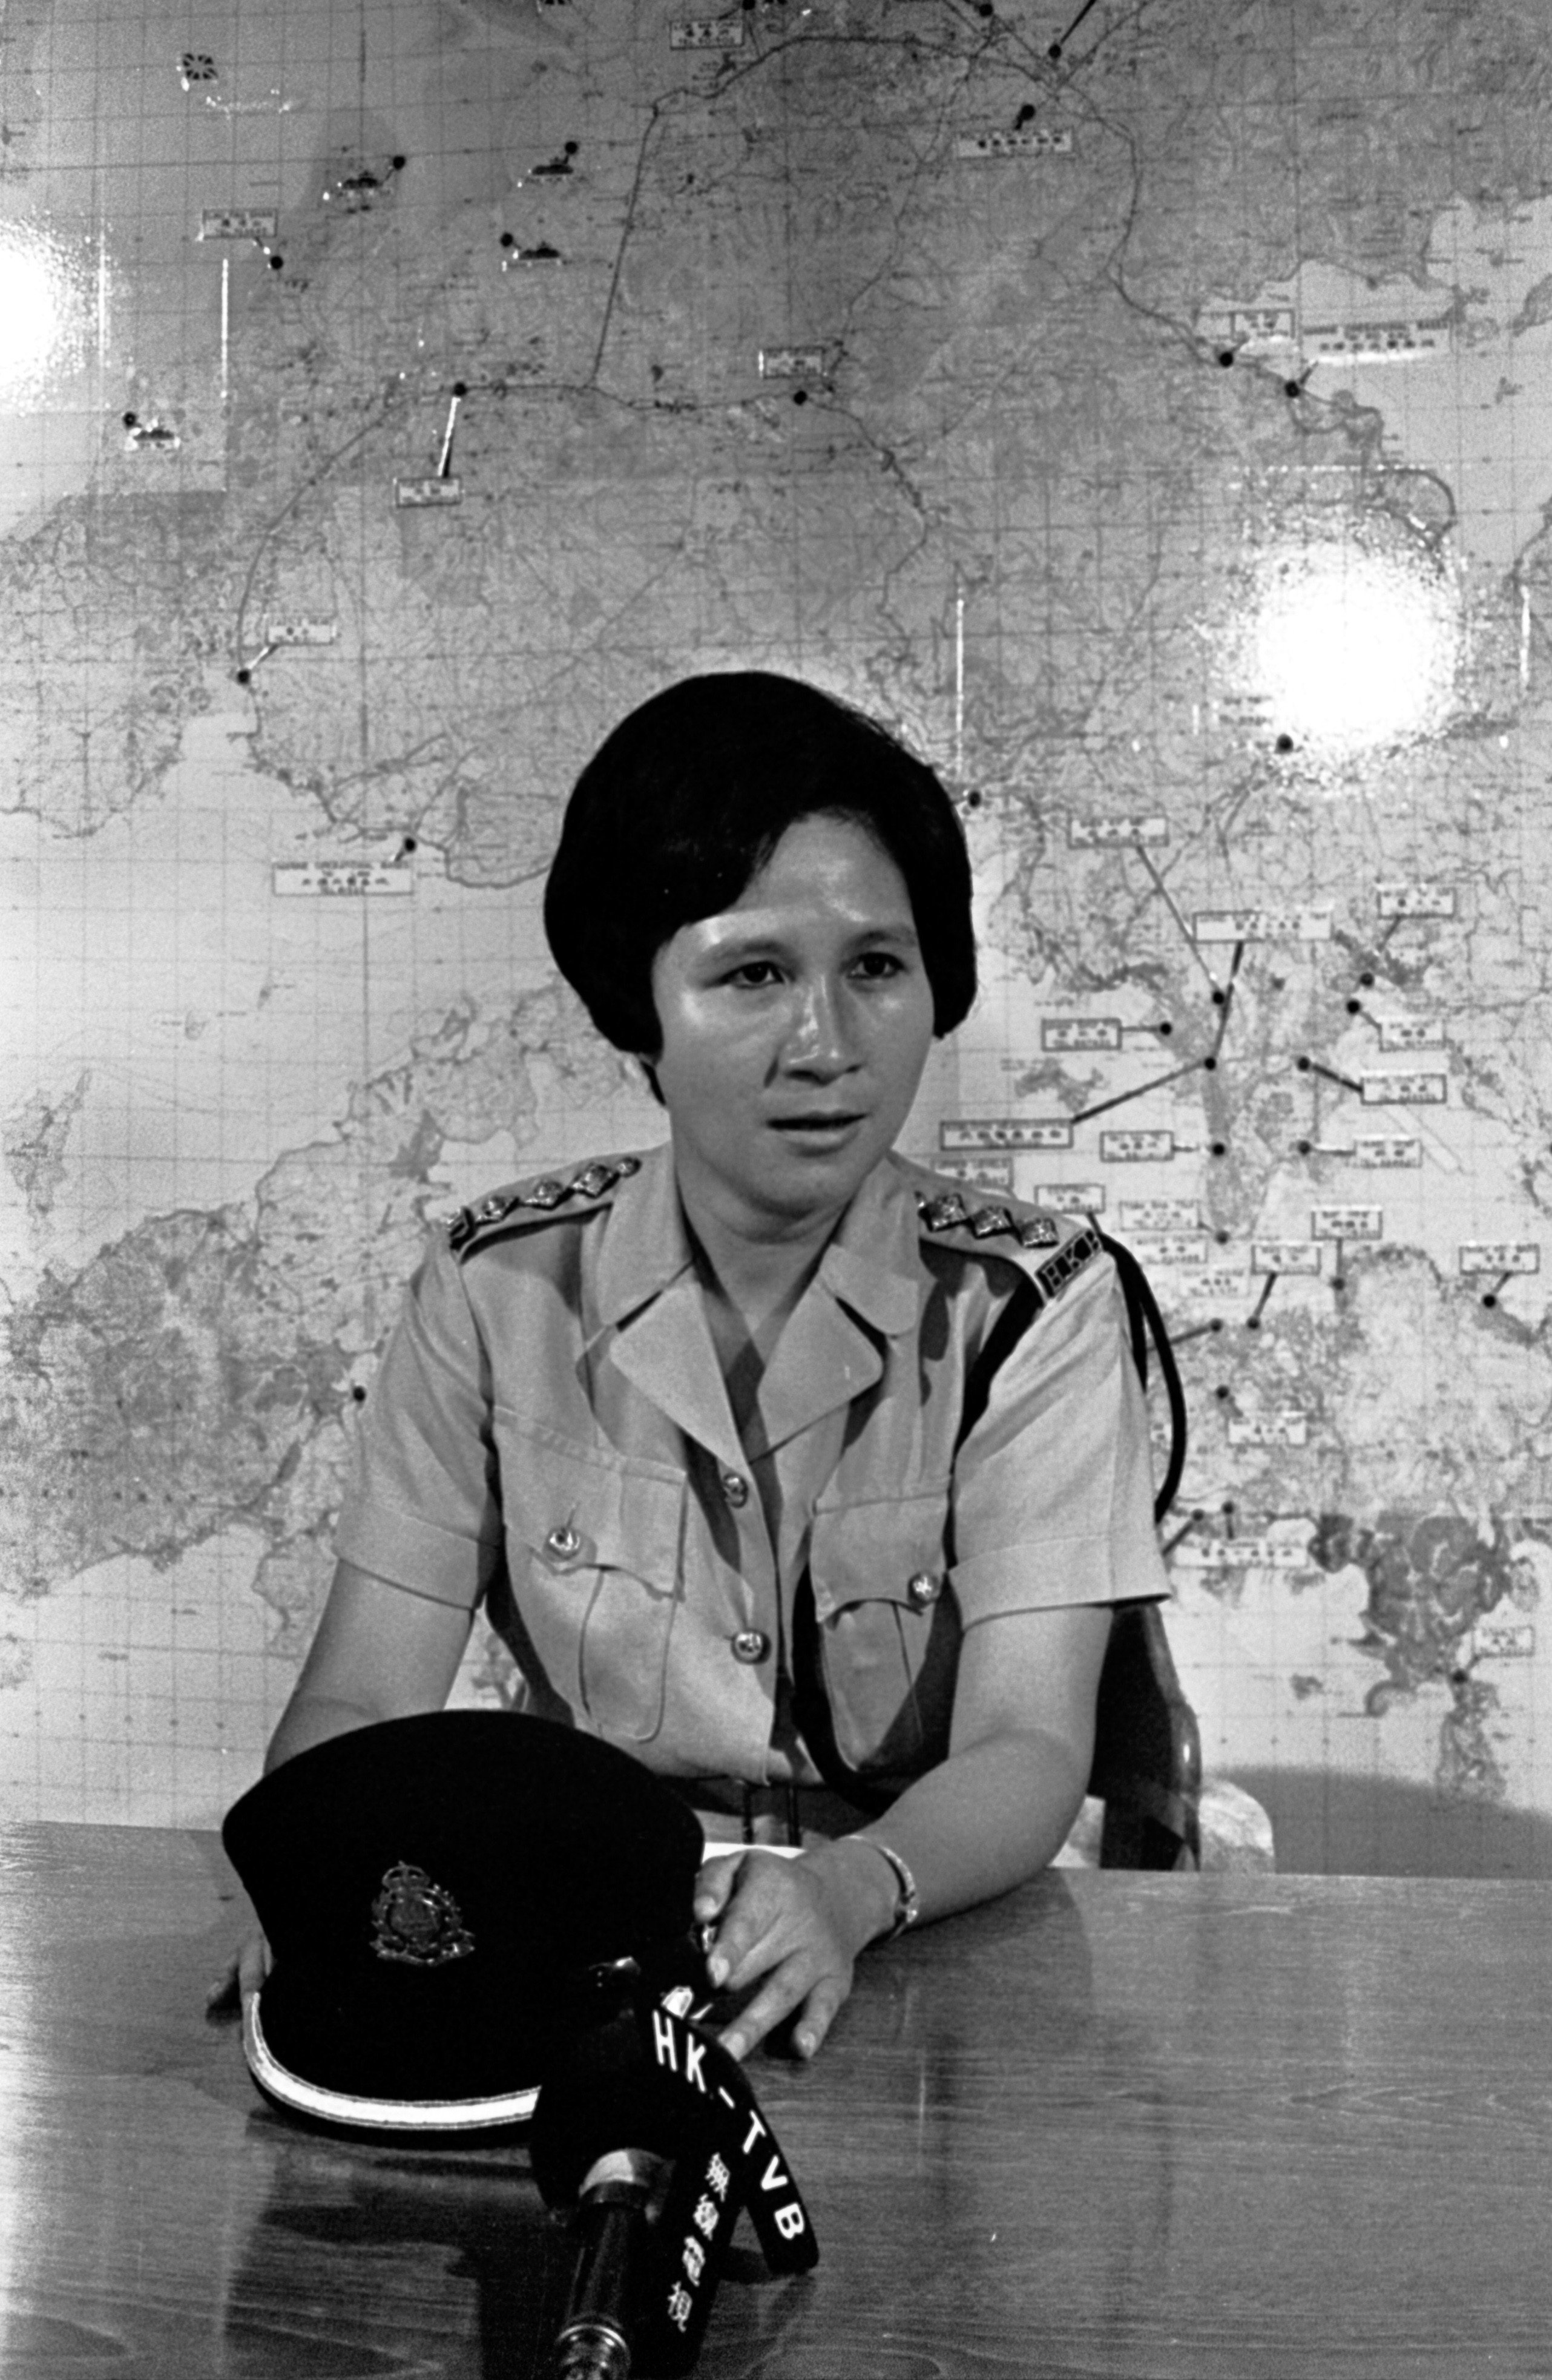 Helen Lui was the first female Chinese officer to be sent to UK for advance training, reach the rank of senior inspector and lead a stop-and-search operation